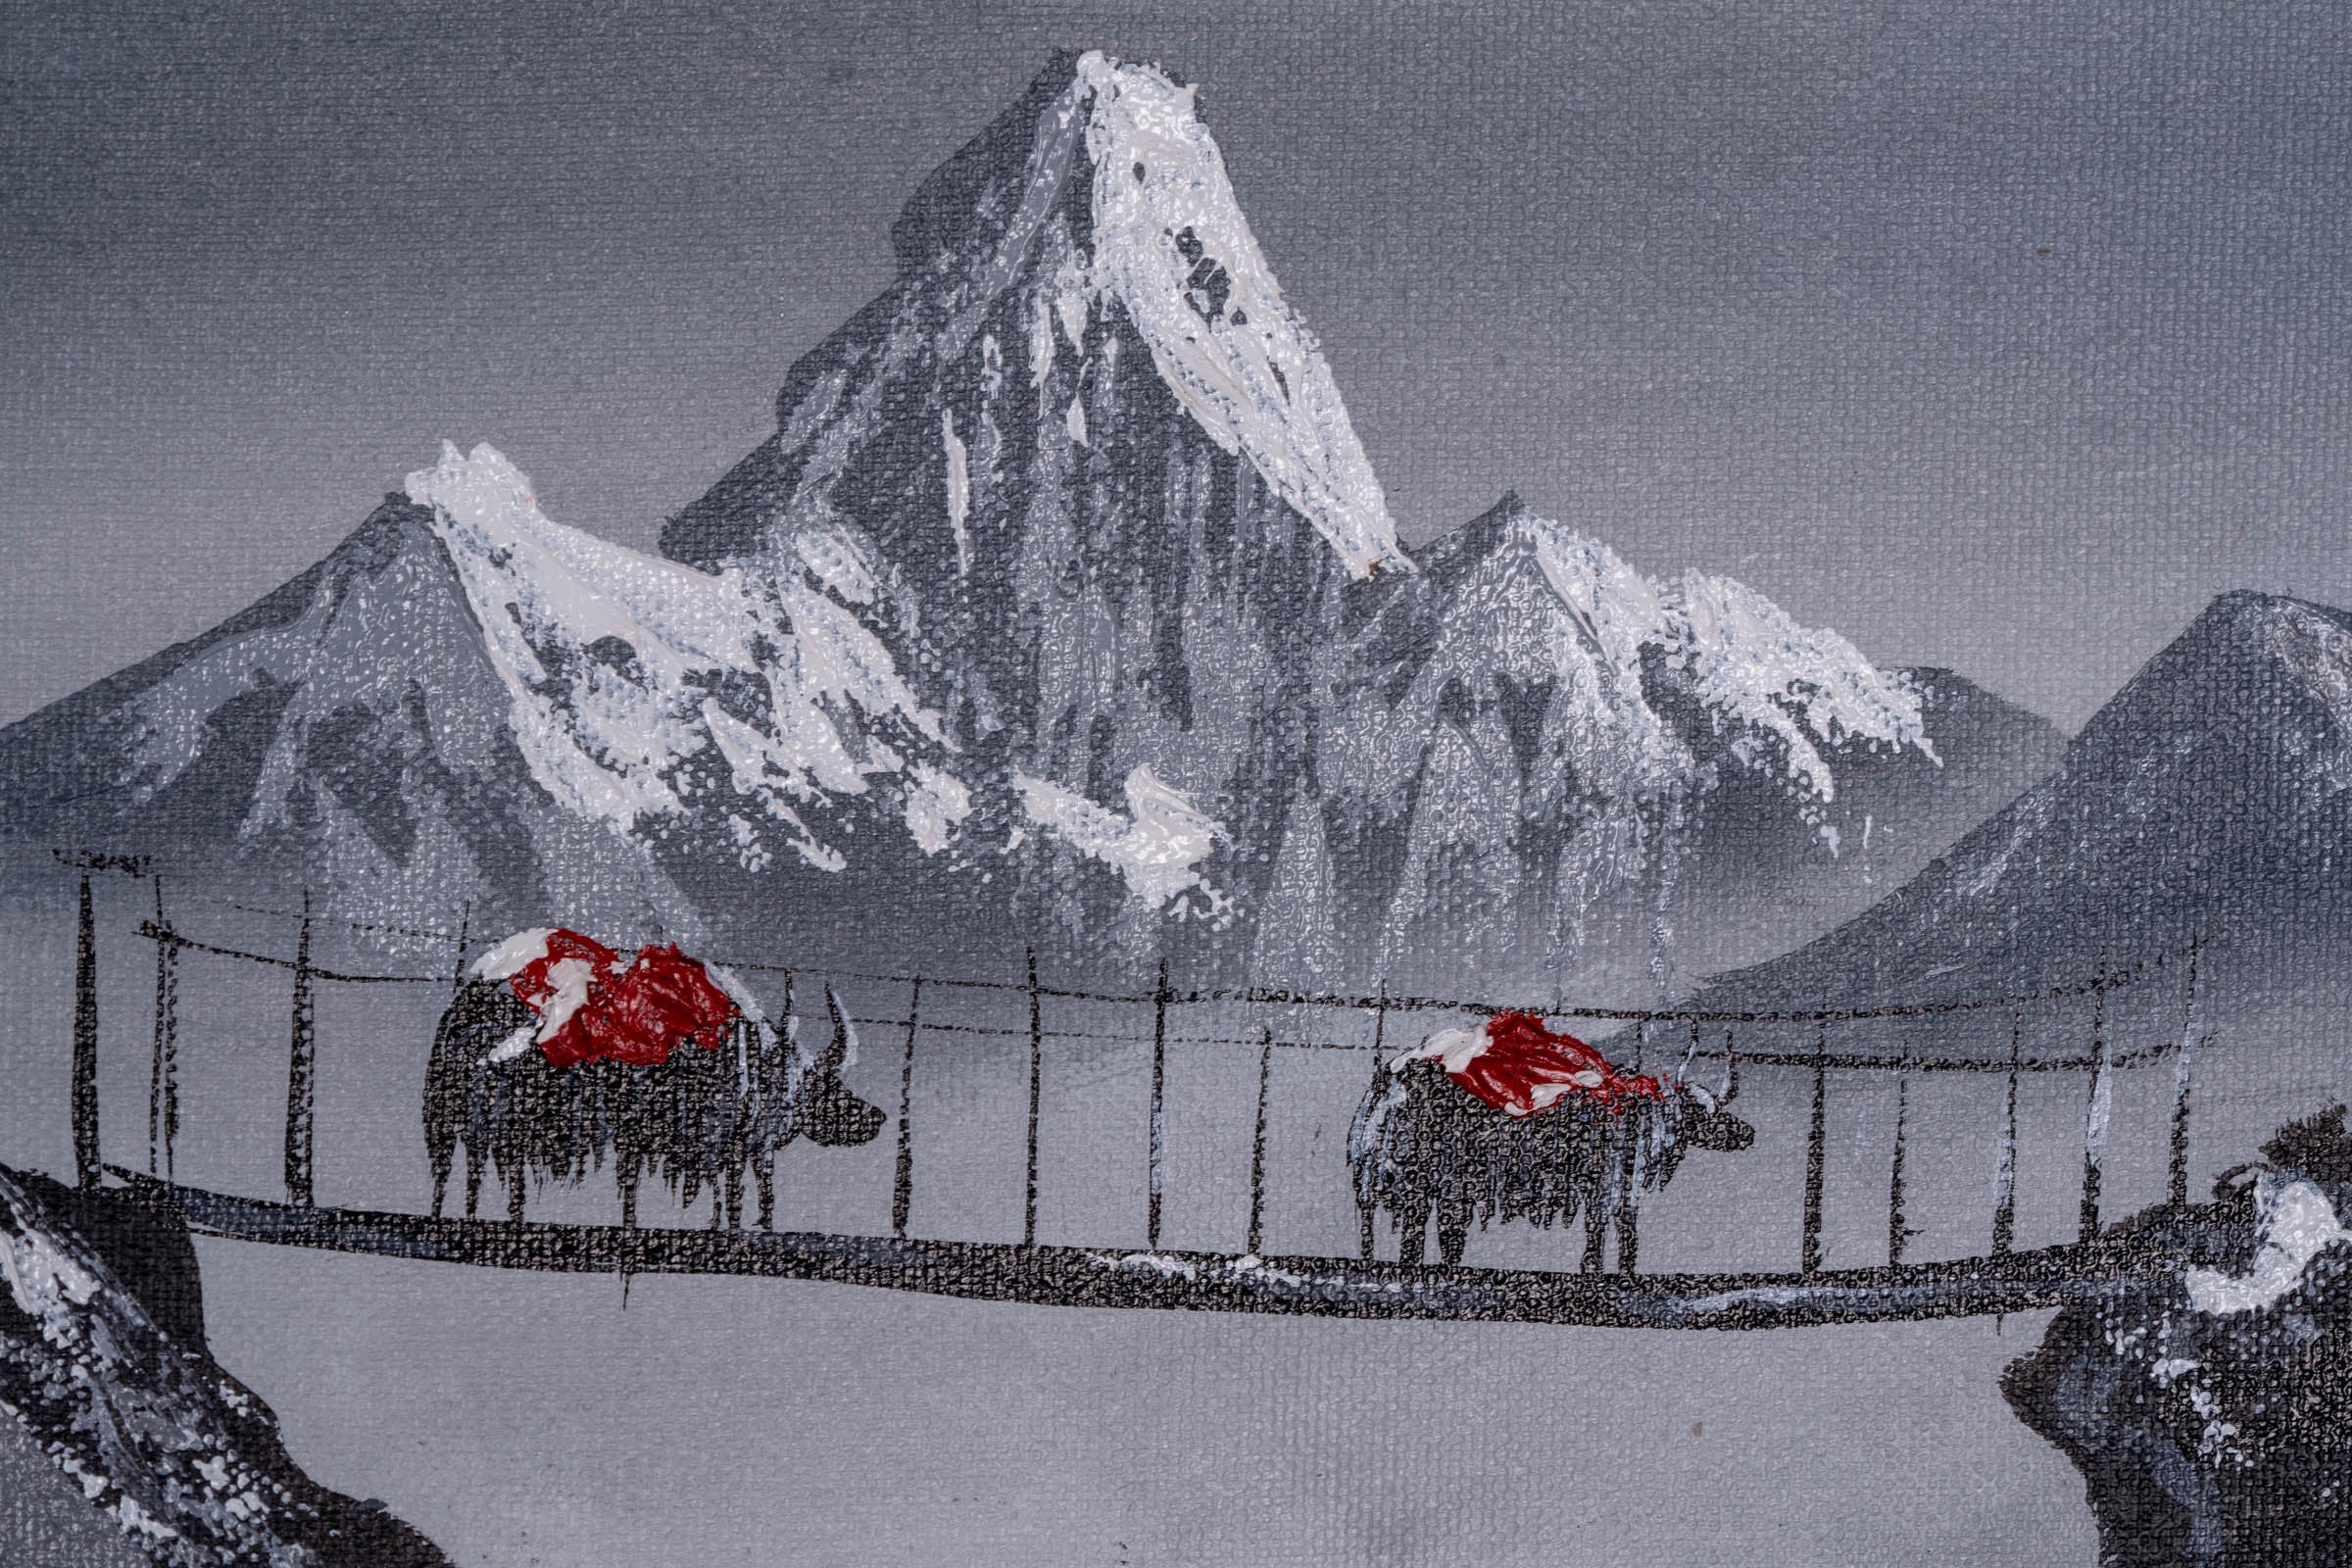 Everest with Ama Dablam - Oil Painting - Lucky Thanka